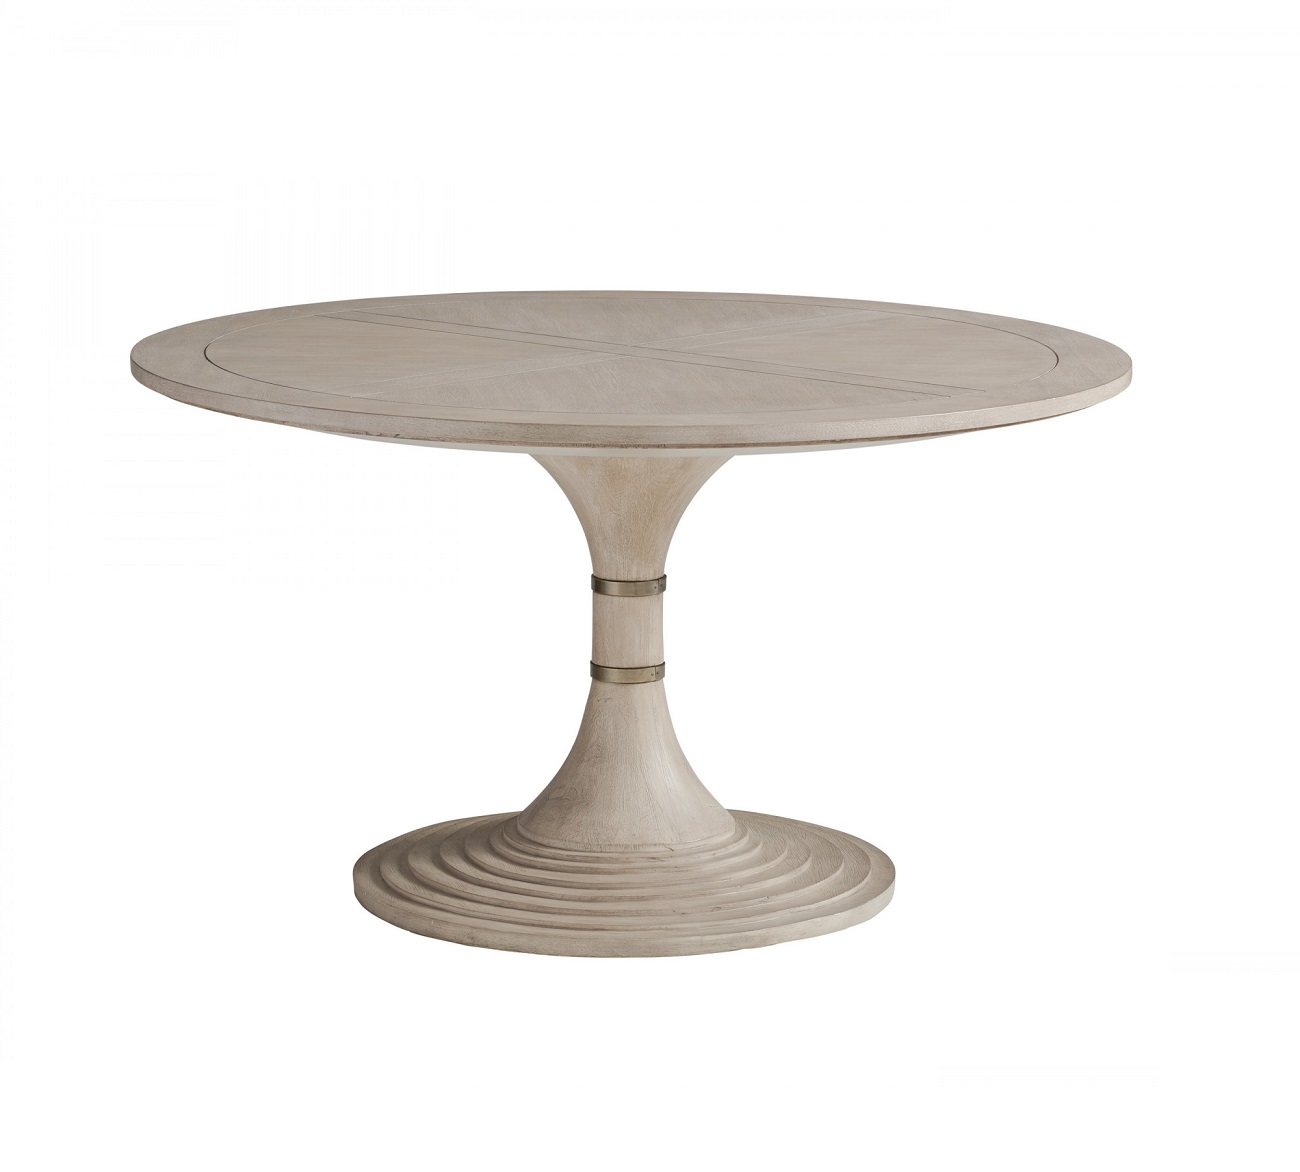 Topanga Round Dining Table, Round Dining Tables For Sale, Brooklyn, New York, Furniture by ABD